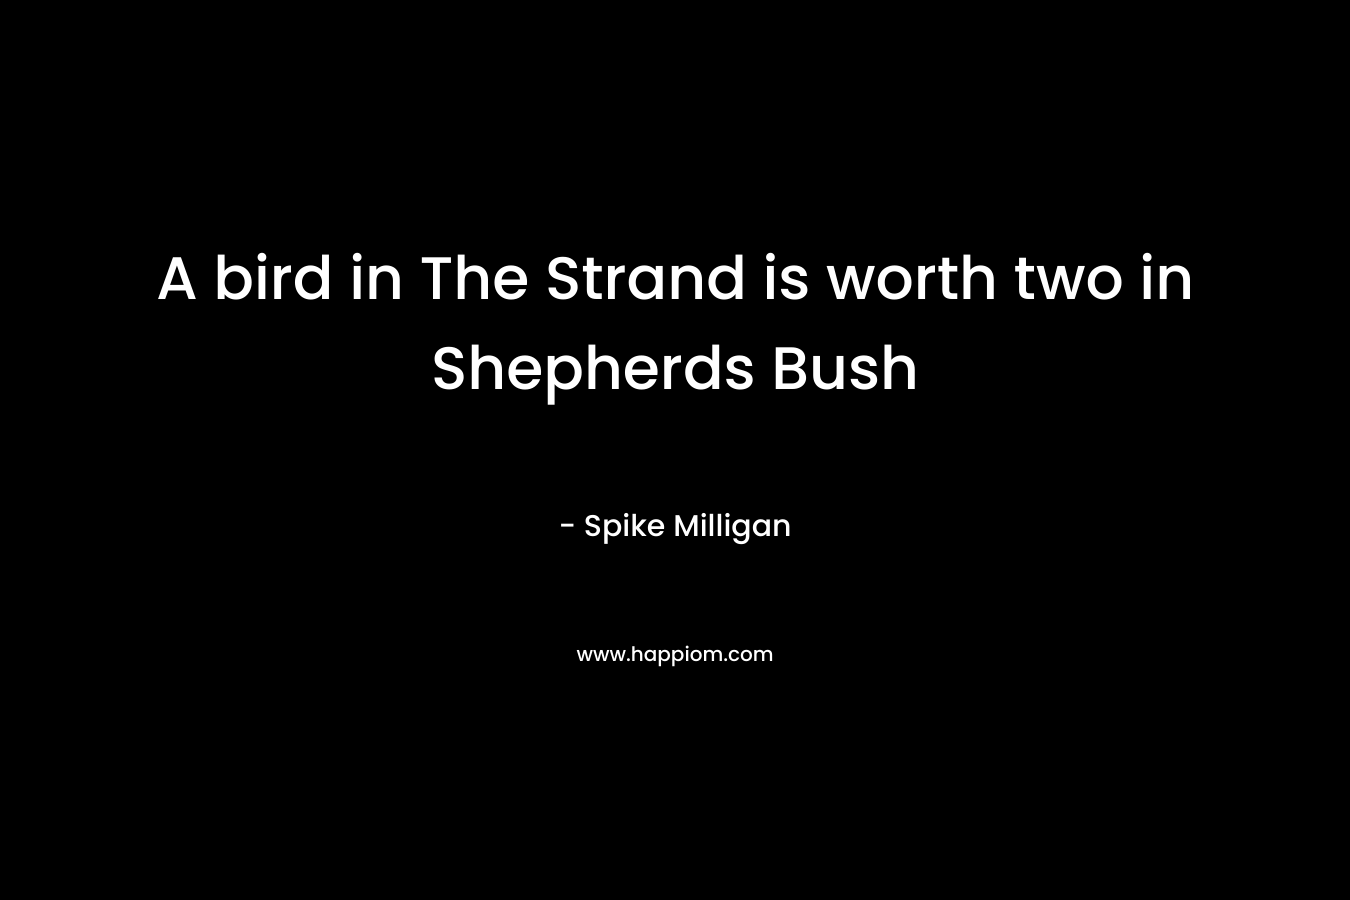 A bird in The Strand is worth two in Shepherds Bush – Spike Milligan